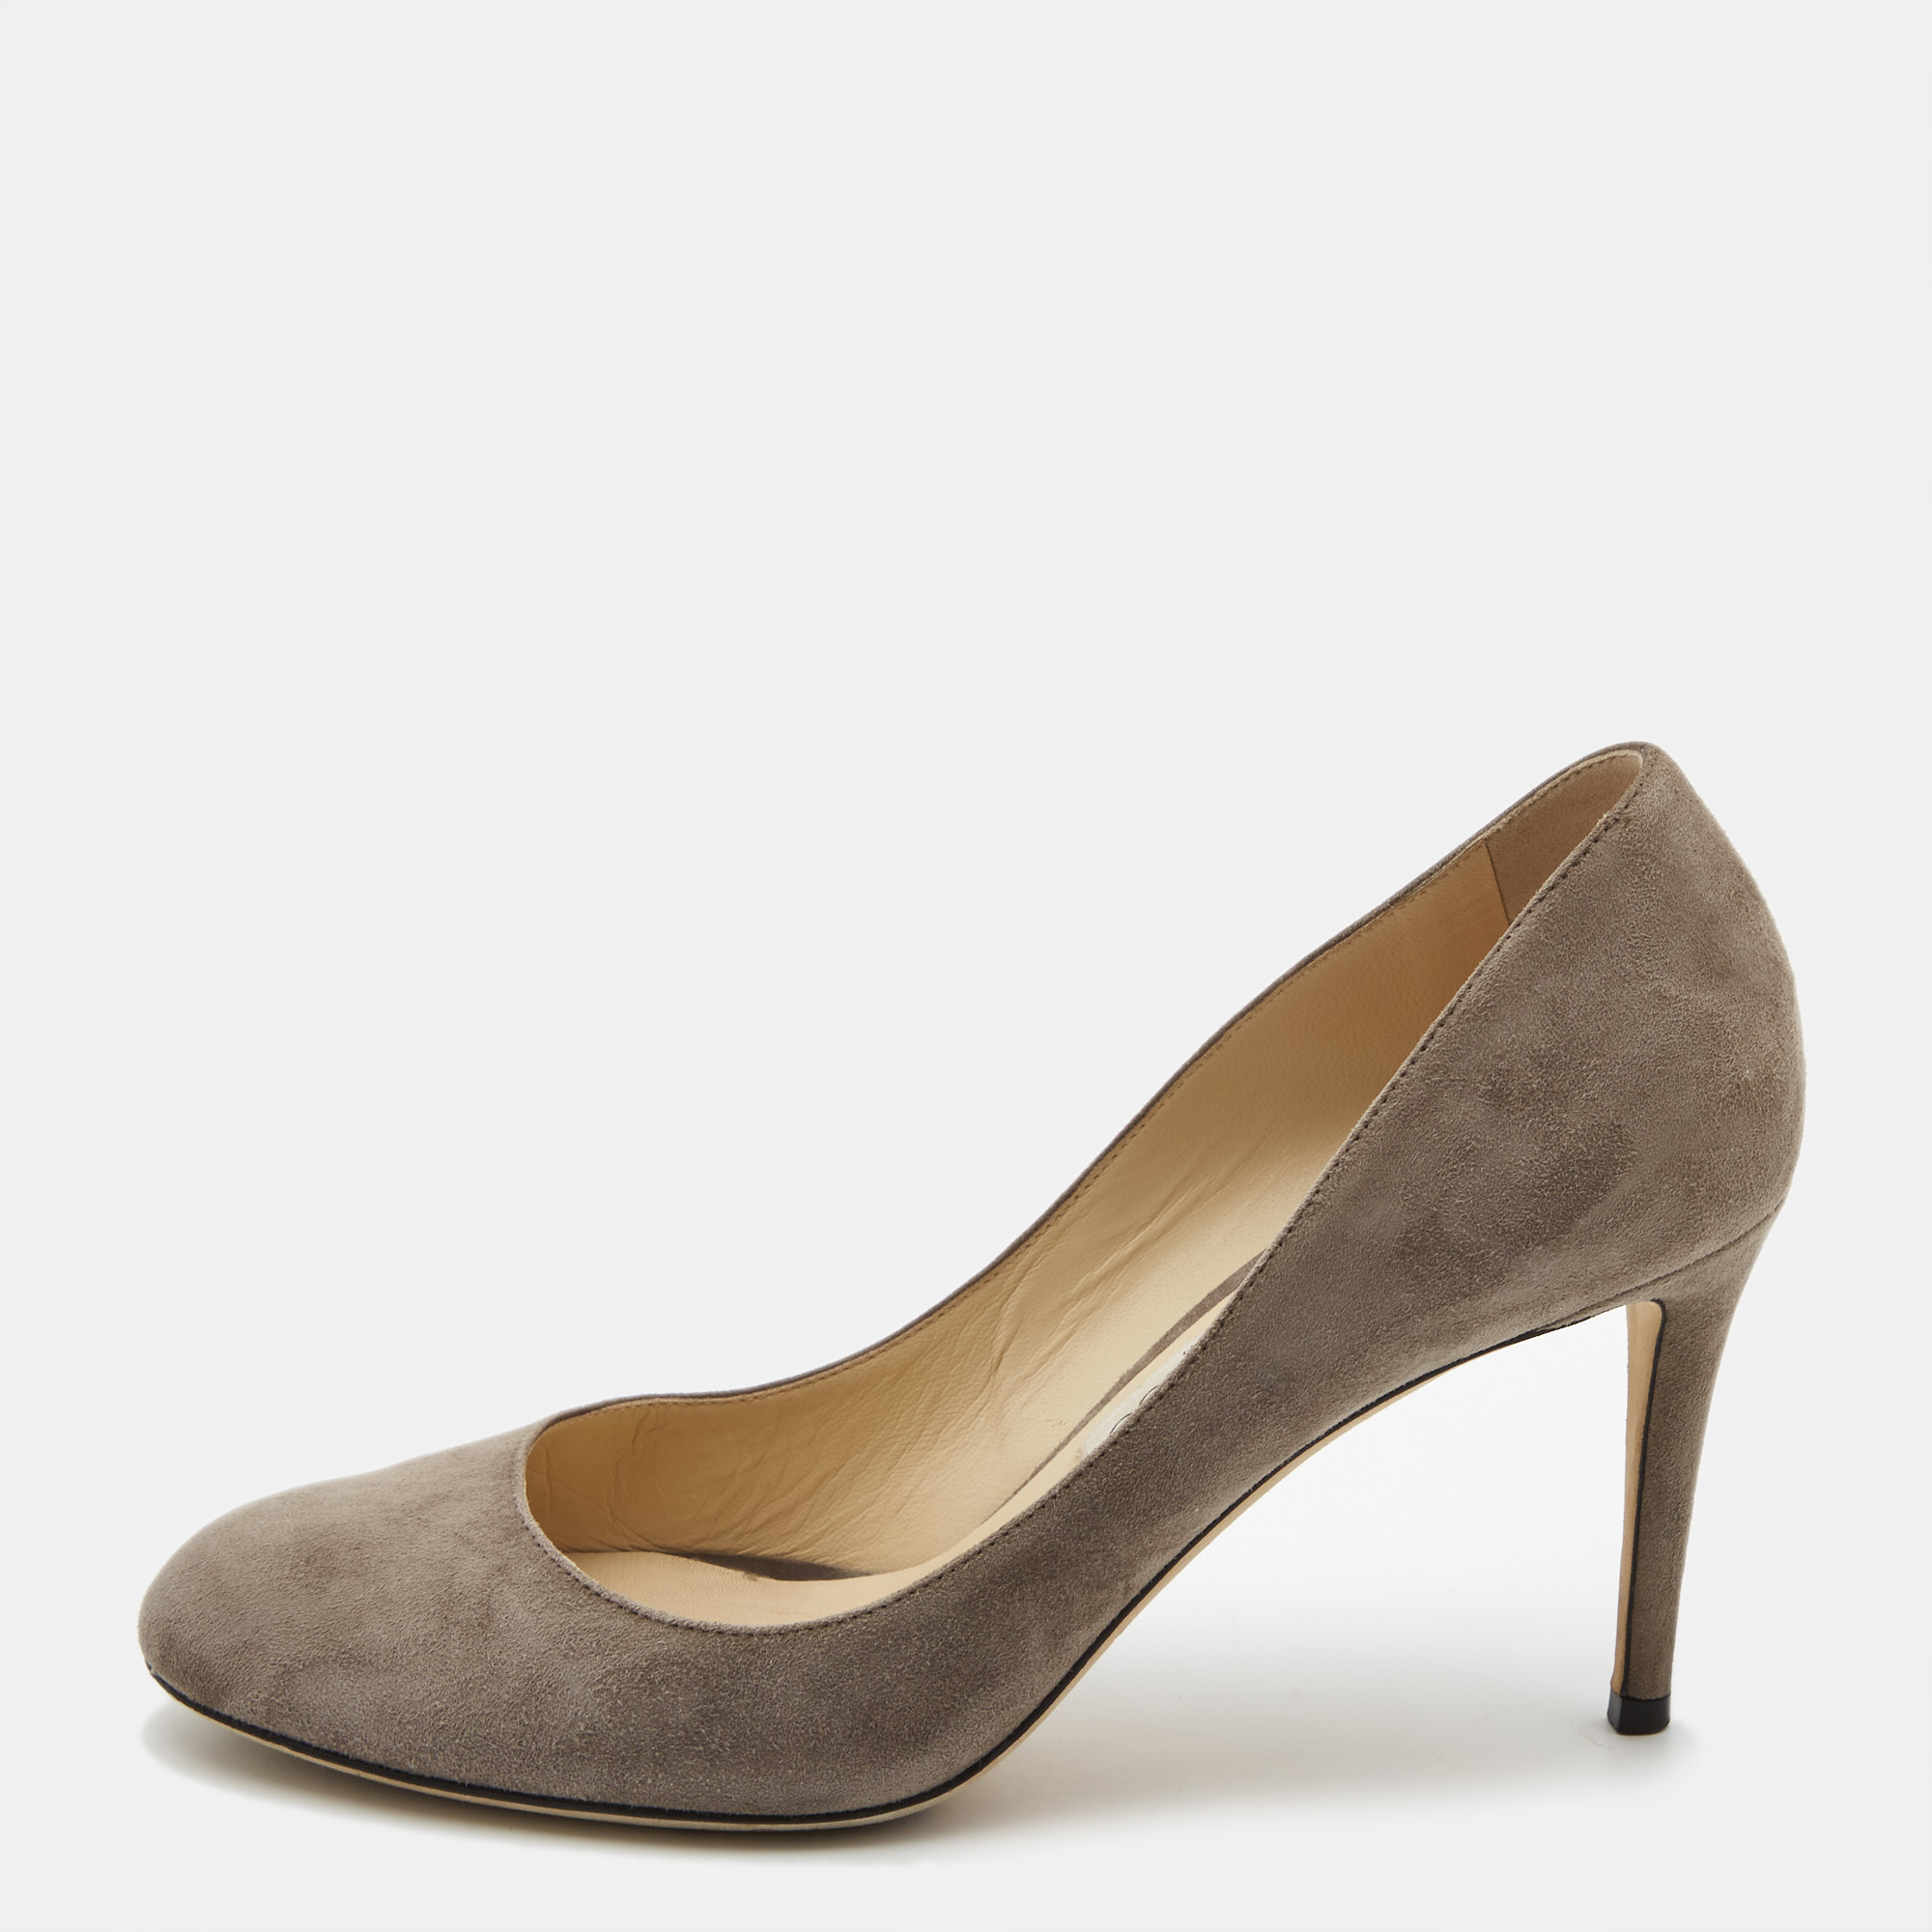 Jimmy choo grey suede round toe pumps size 38